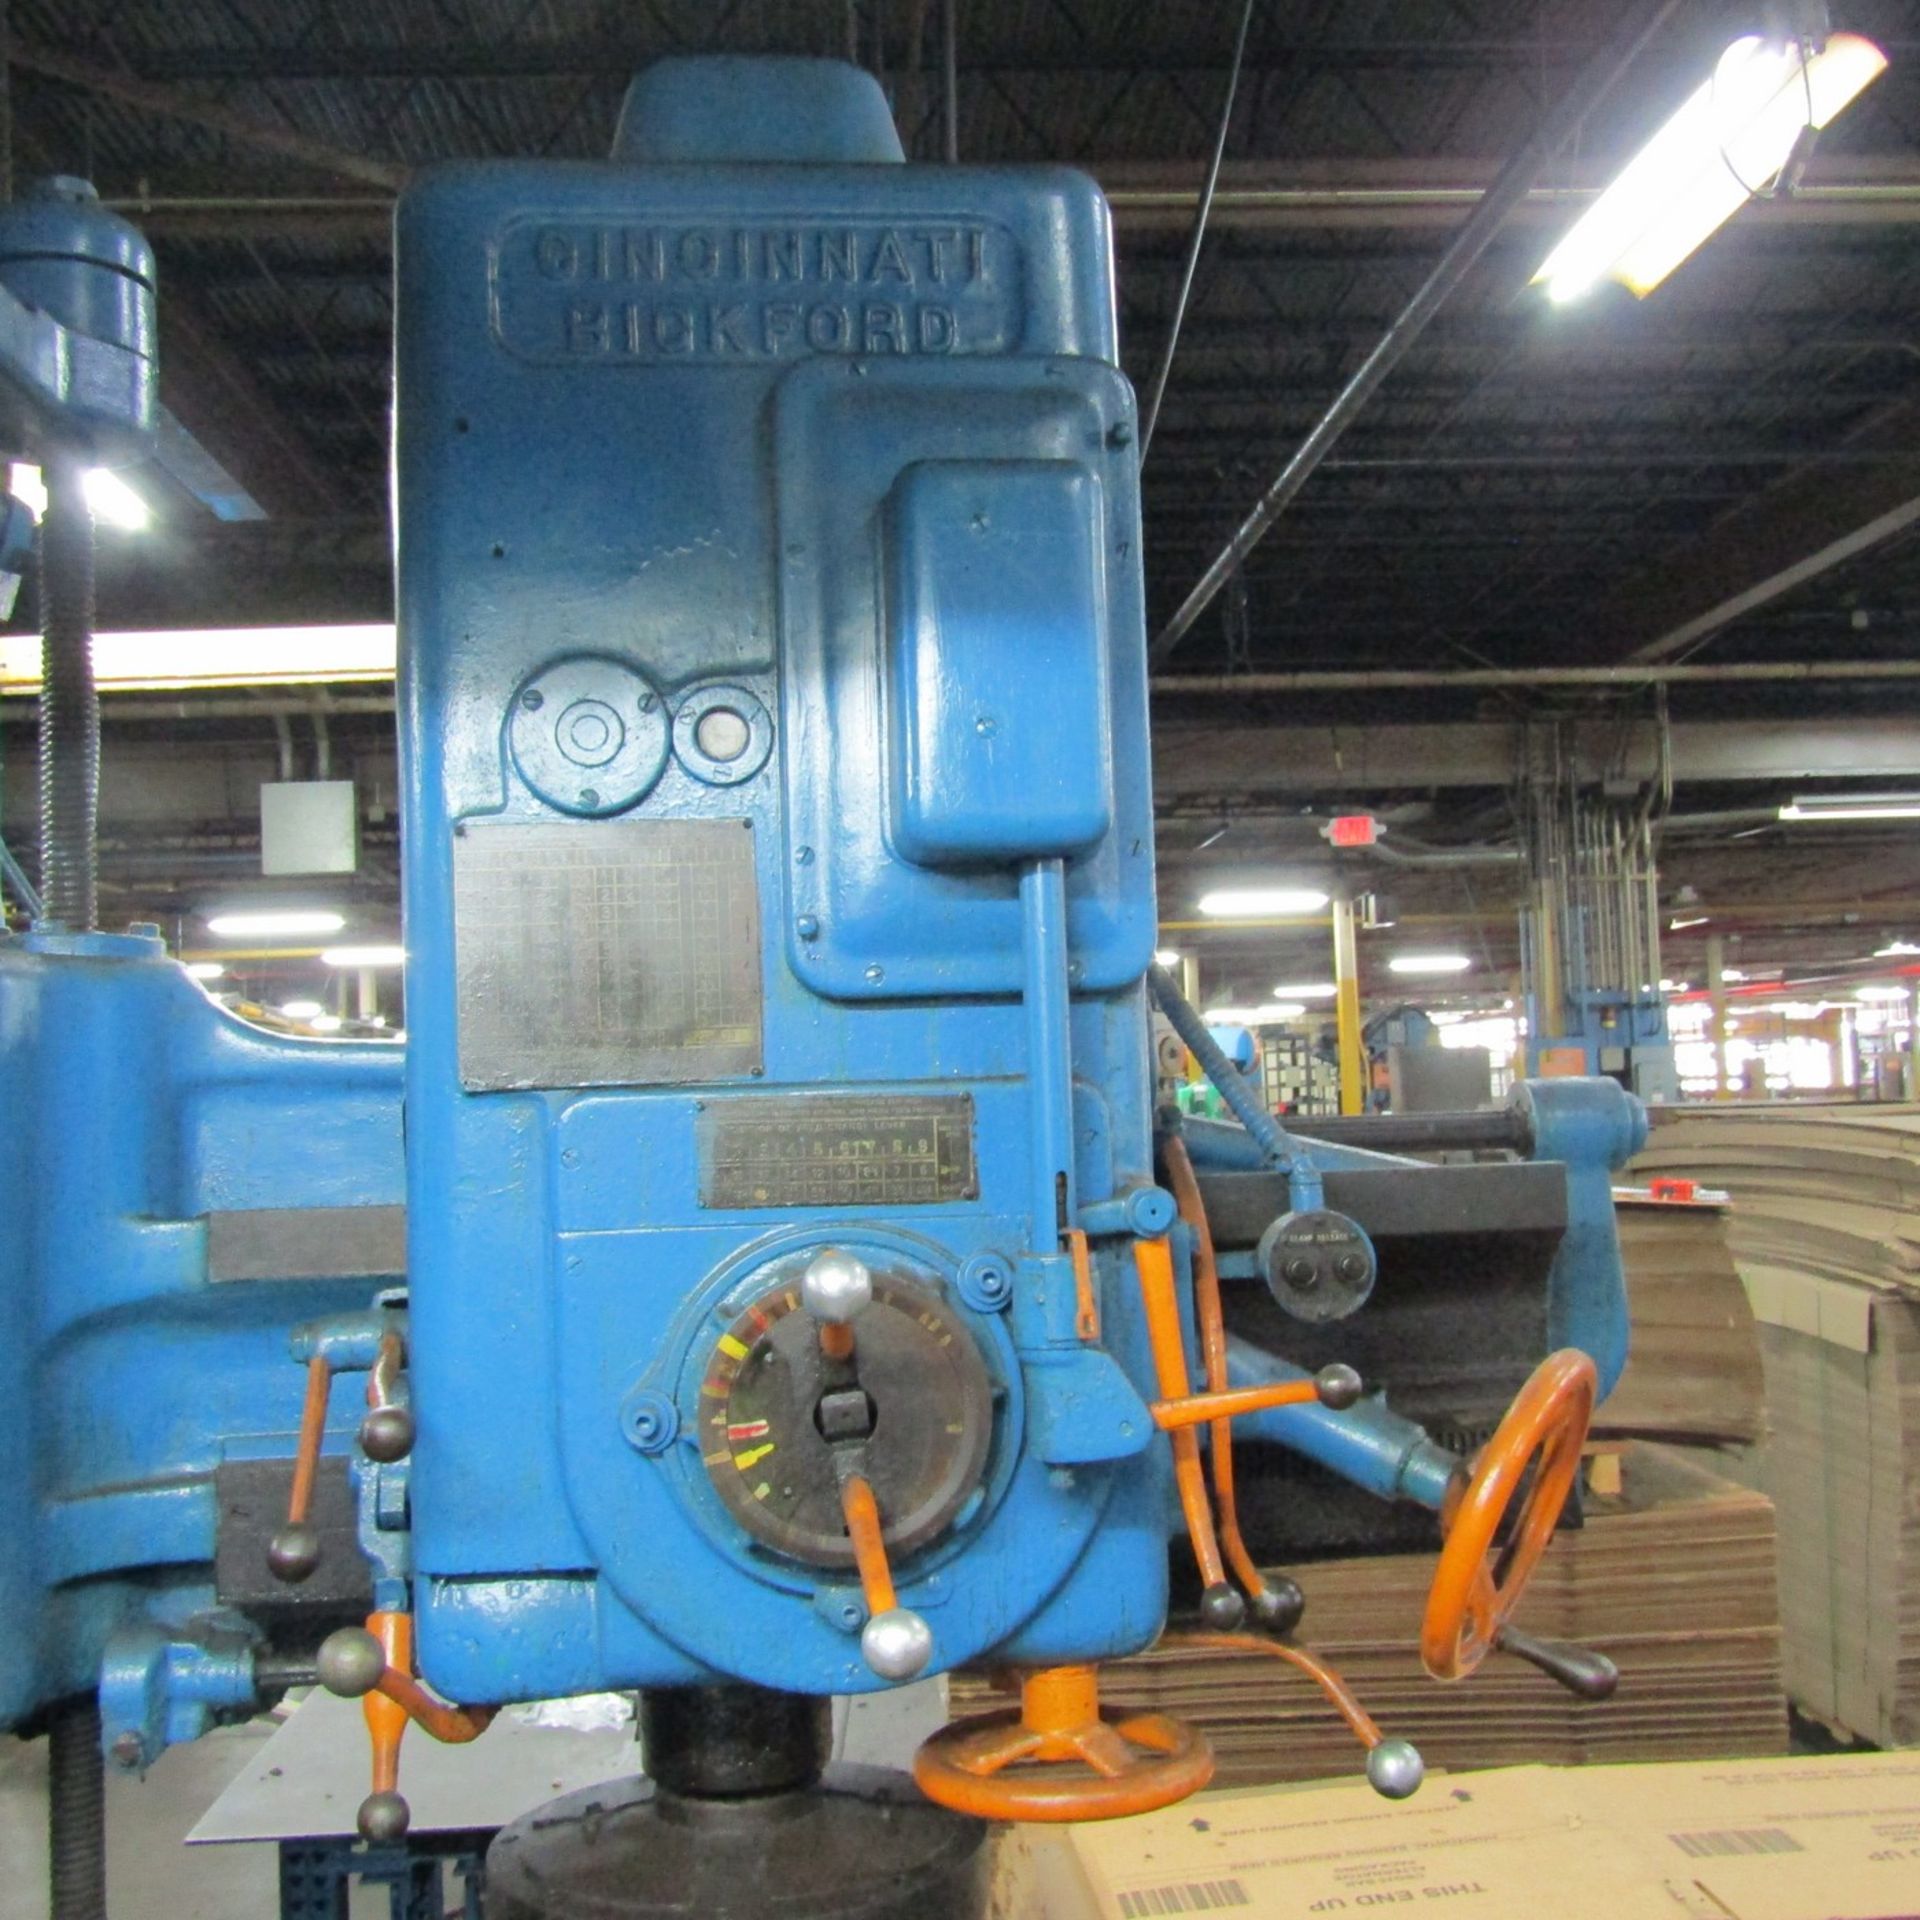 Cincinnati Bickford 11 in. x 46 in. Arm Super Service Radial Arm Drill, S/N: 2E-413; with Box - Image 5 of 6